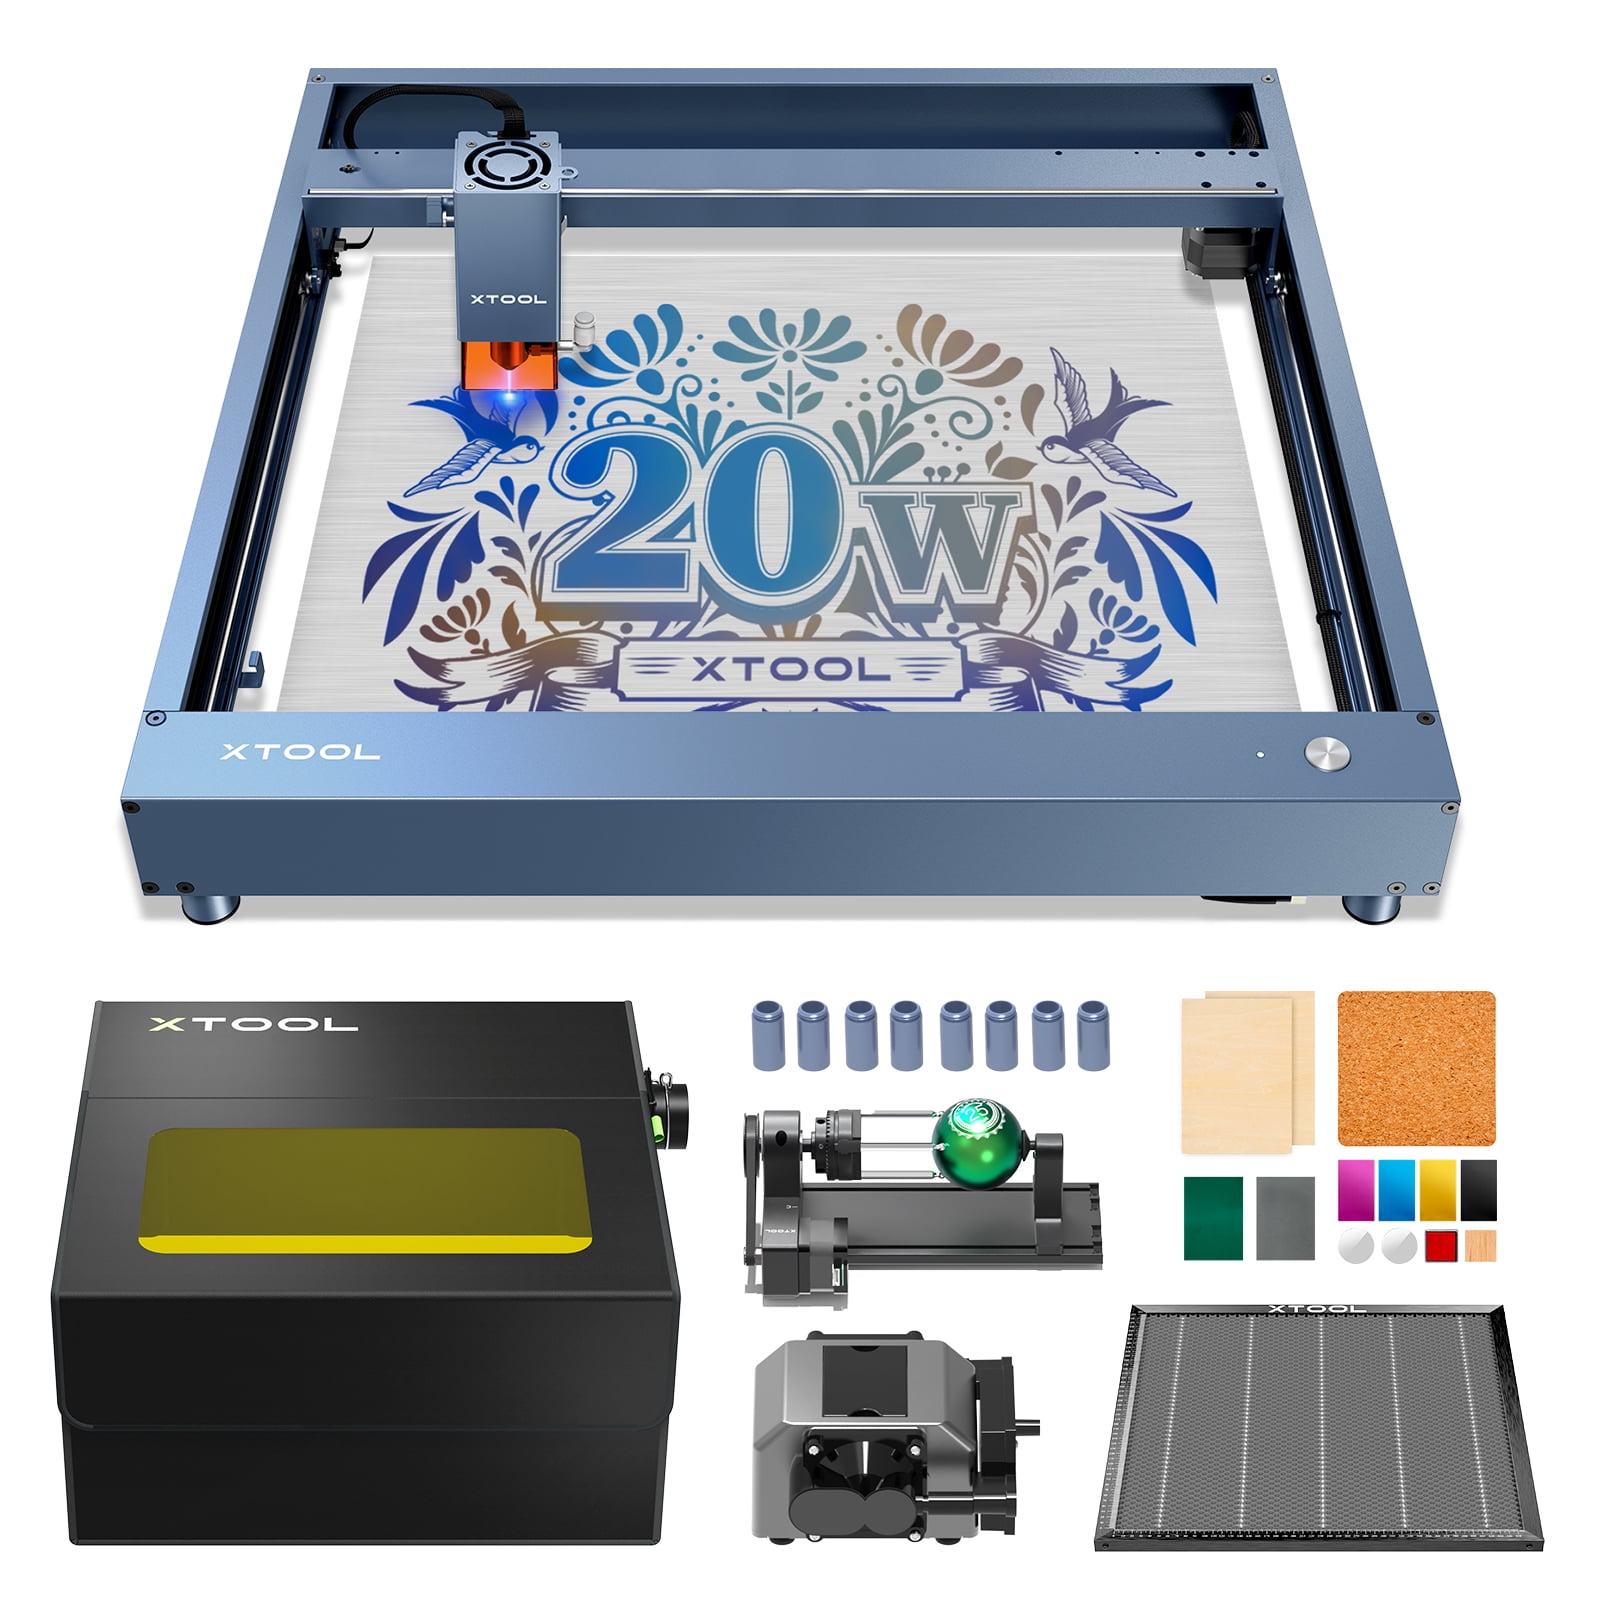 xTool D1 Pro 20W Laser Engraver Deluxe Bundle, with RA2 Pro Rotary